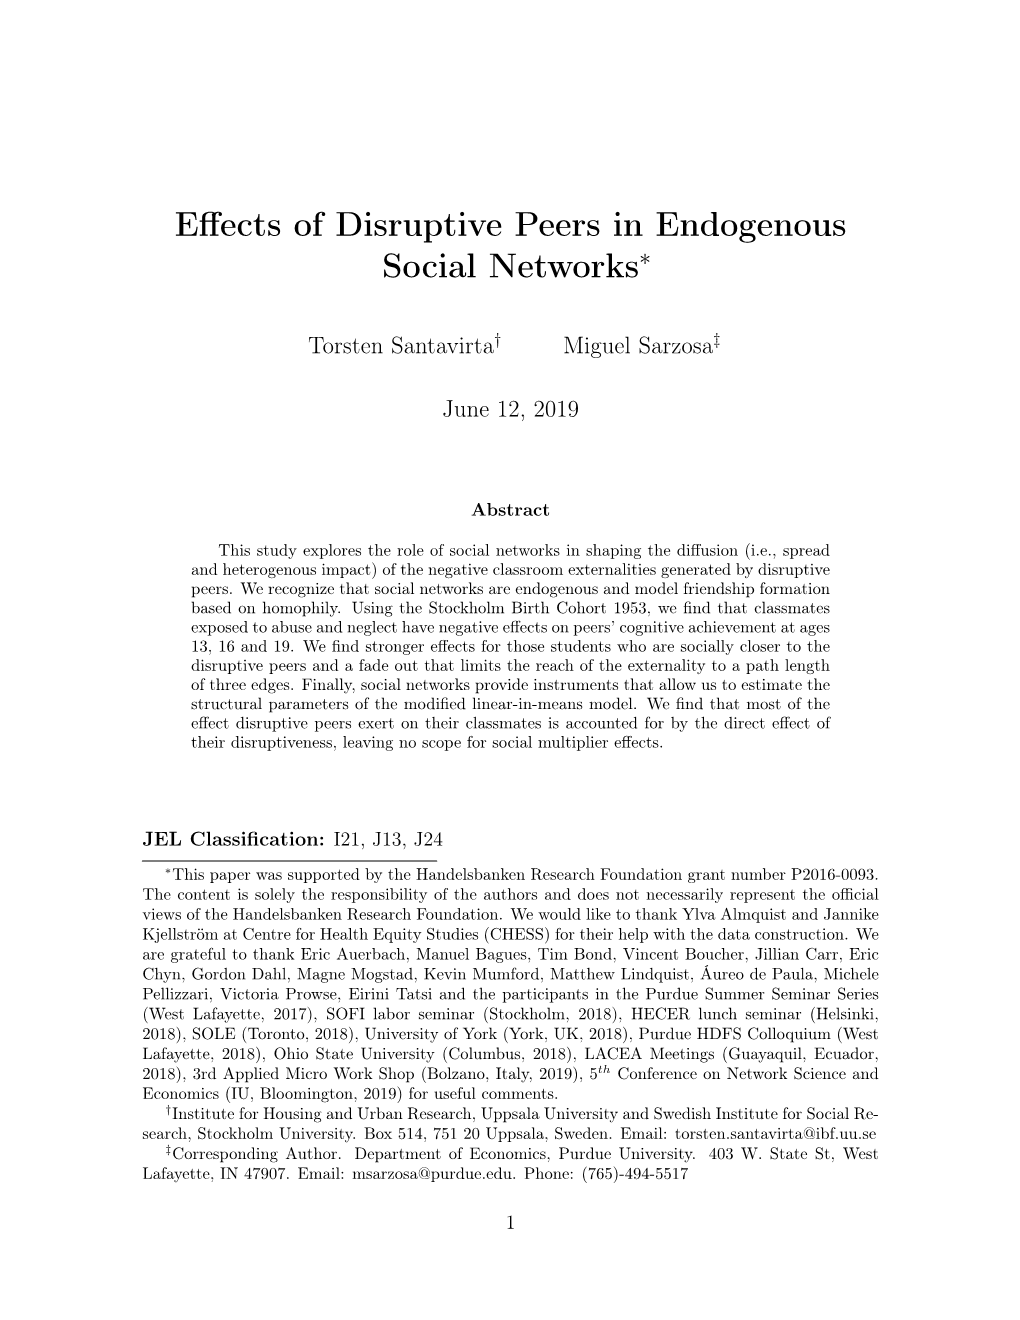 Effects of Disruptive Peers in Endogenous Social Networks